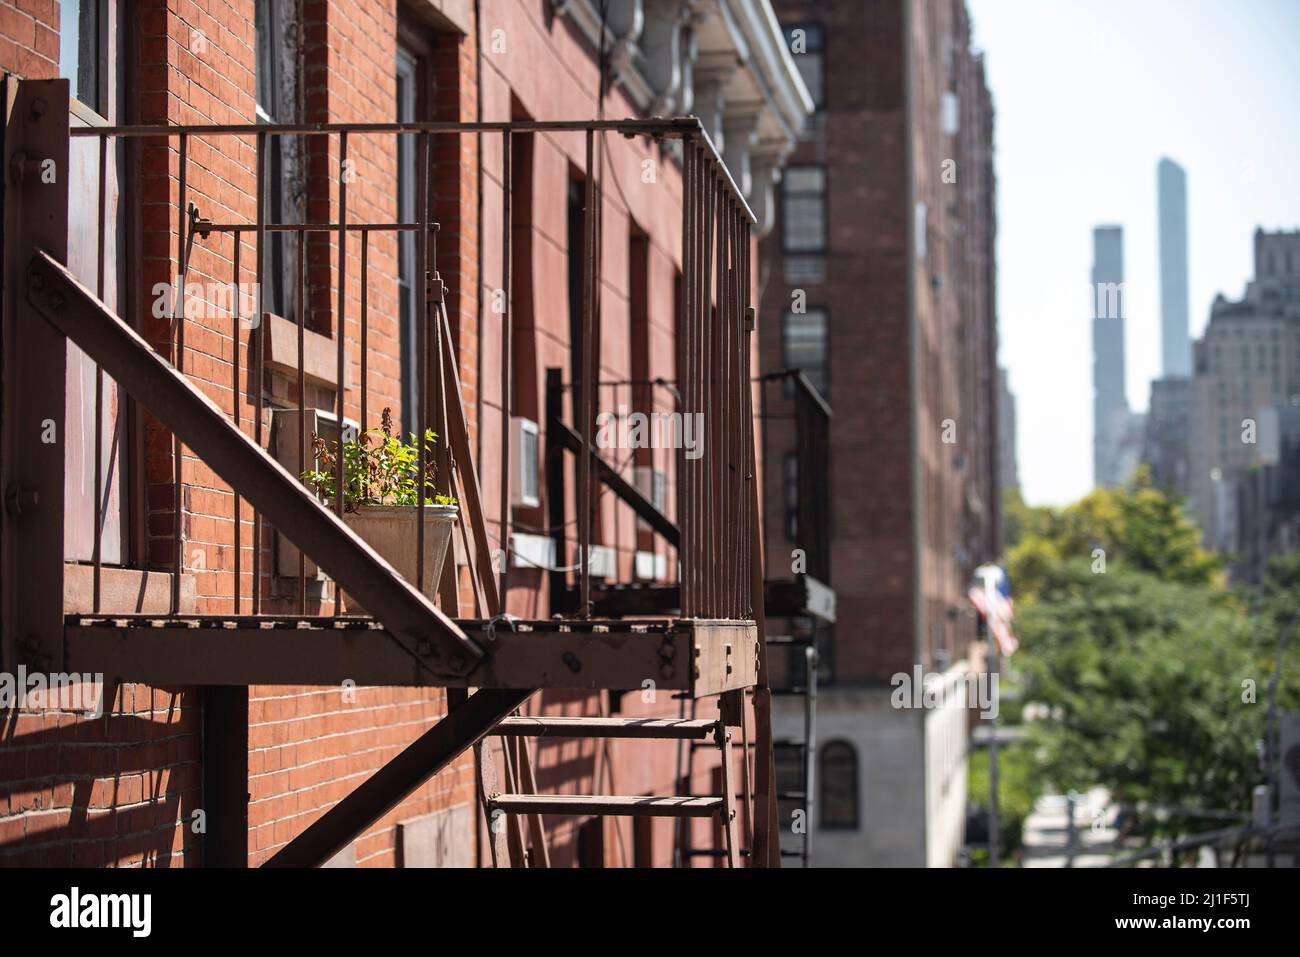 A small container garden on a fire escape of an apartment building in New York City. View from The Highline Park. Stock Photo